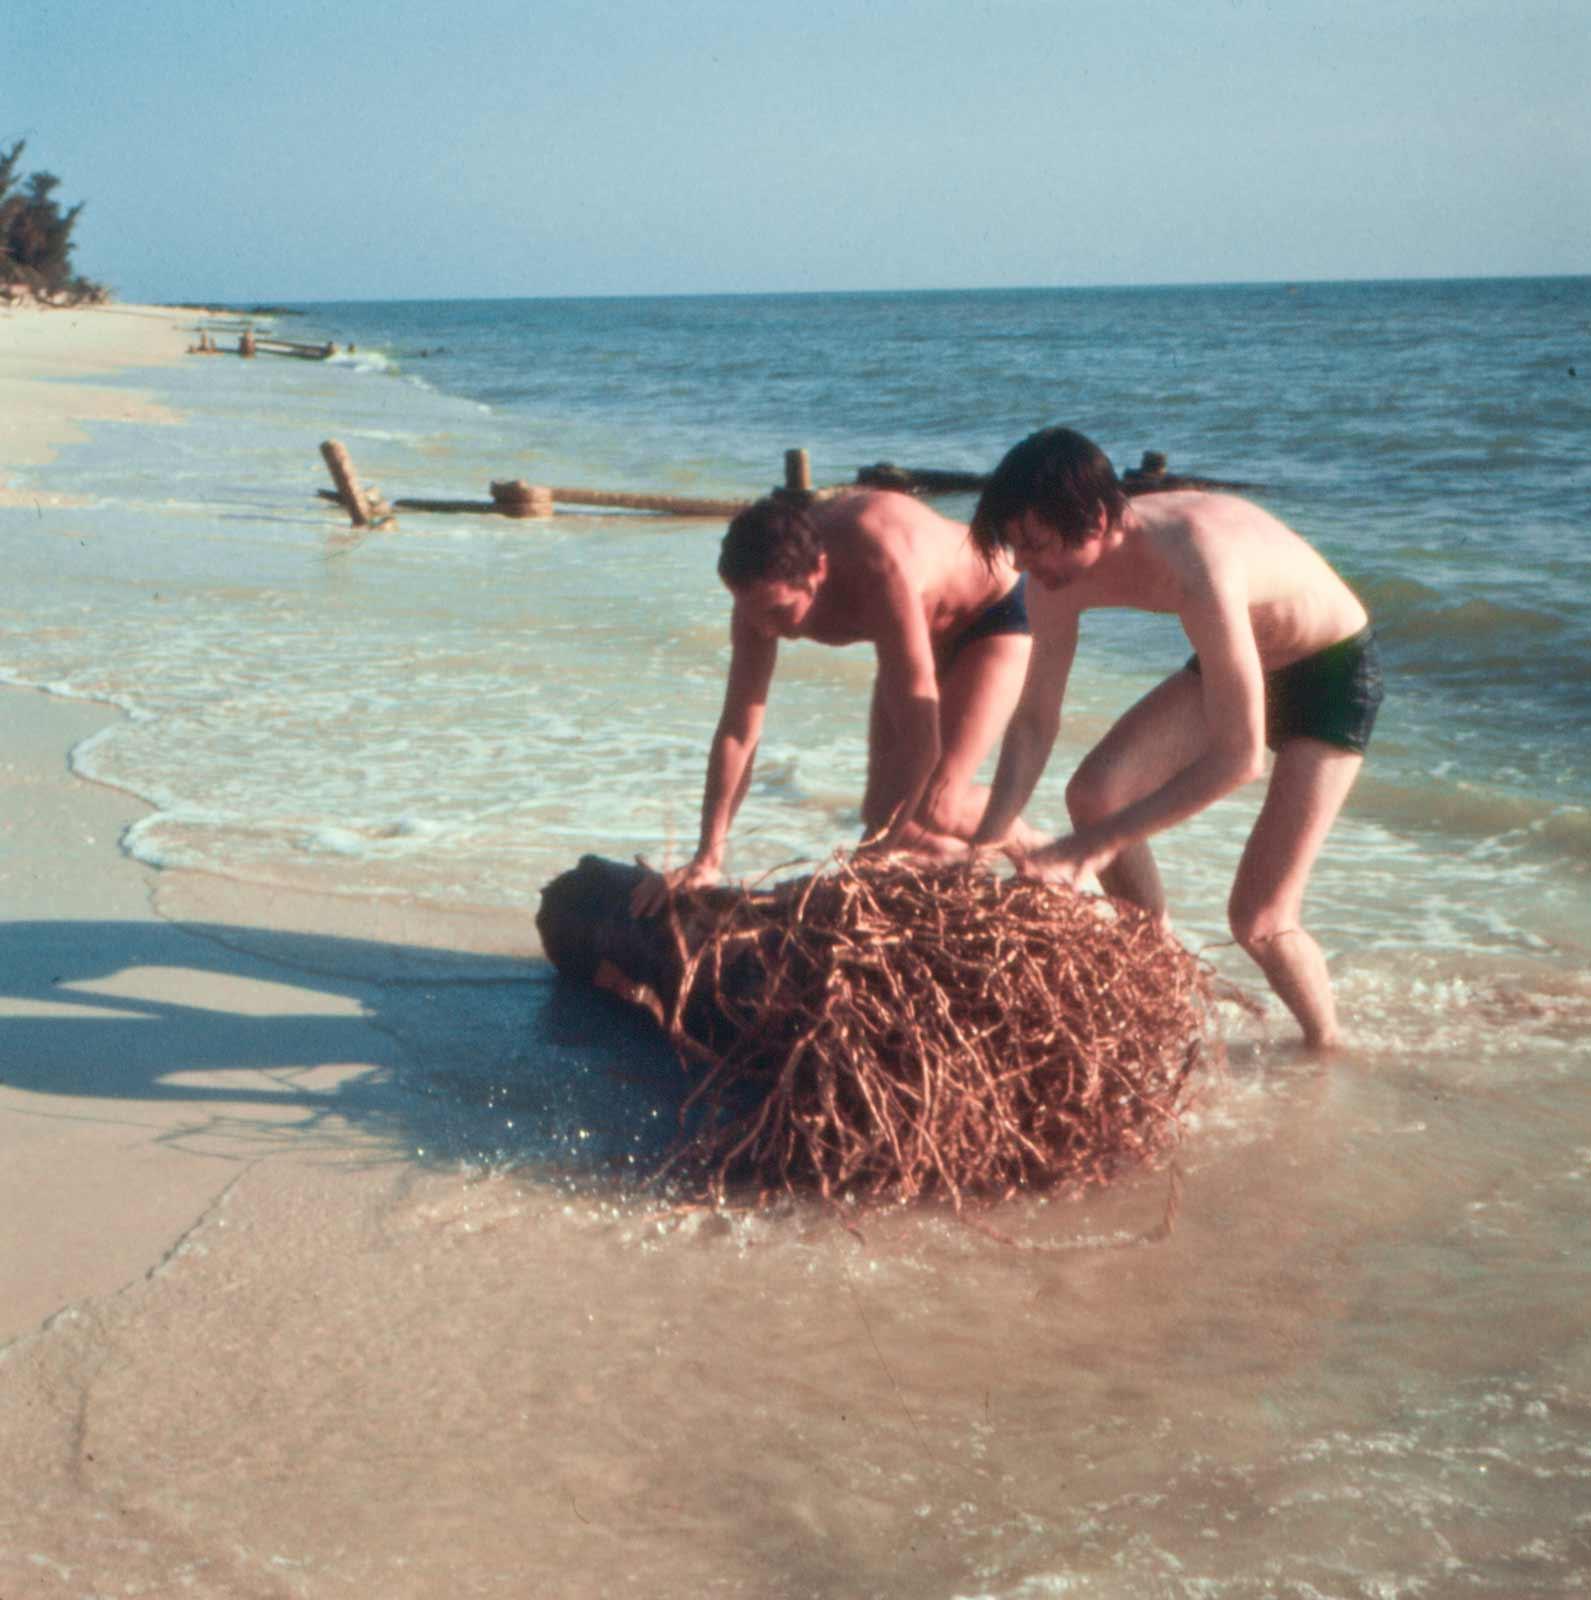 Two men in swimsuits leaned over pushing a tree stump on a sandy beach.